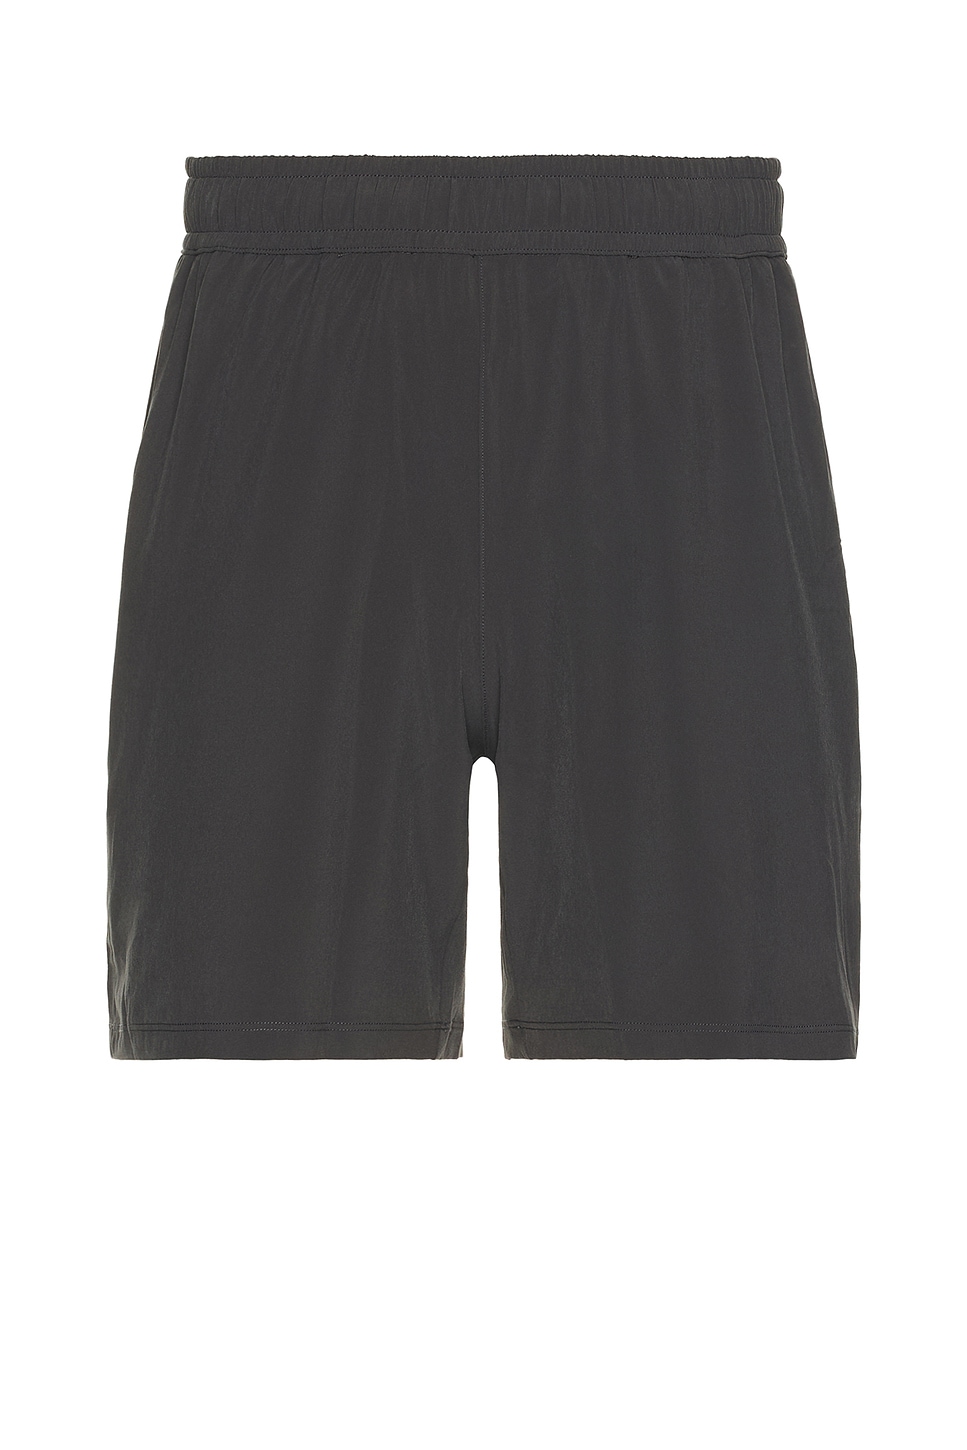 Beyond Yoga Pivotal Performance Short Unlined in Grey